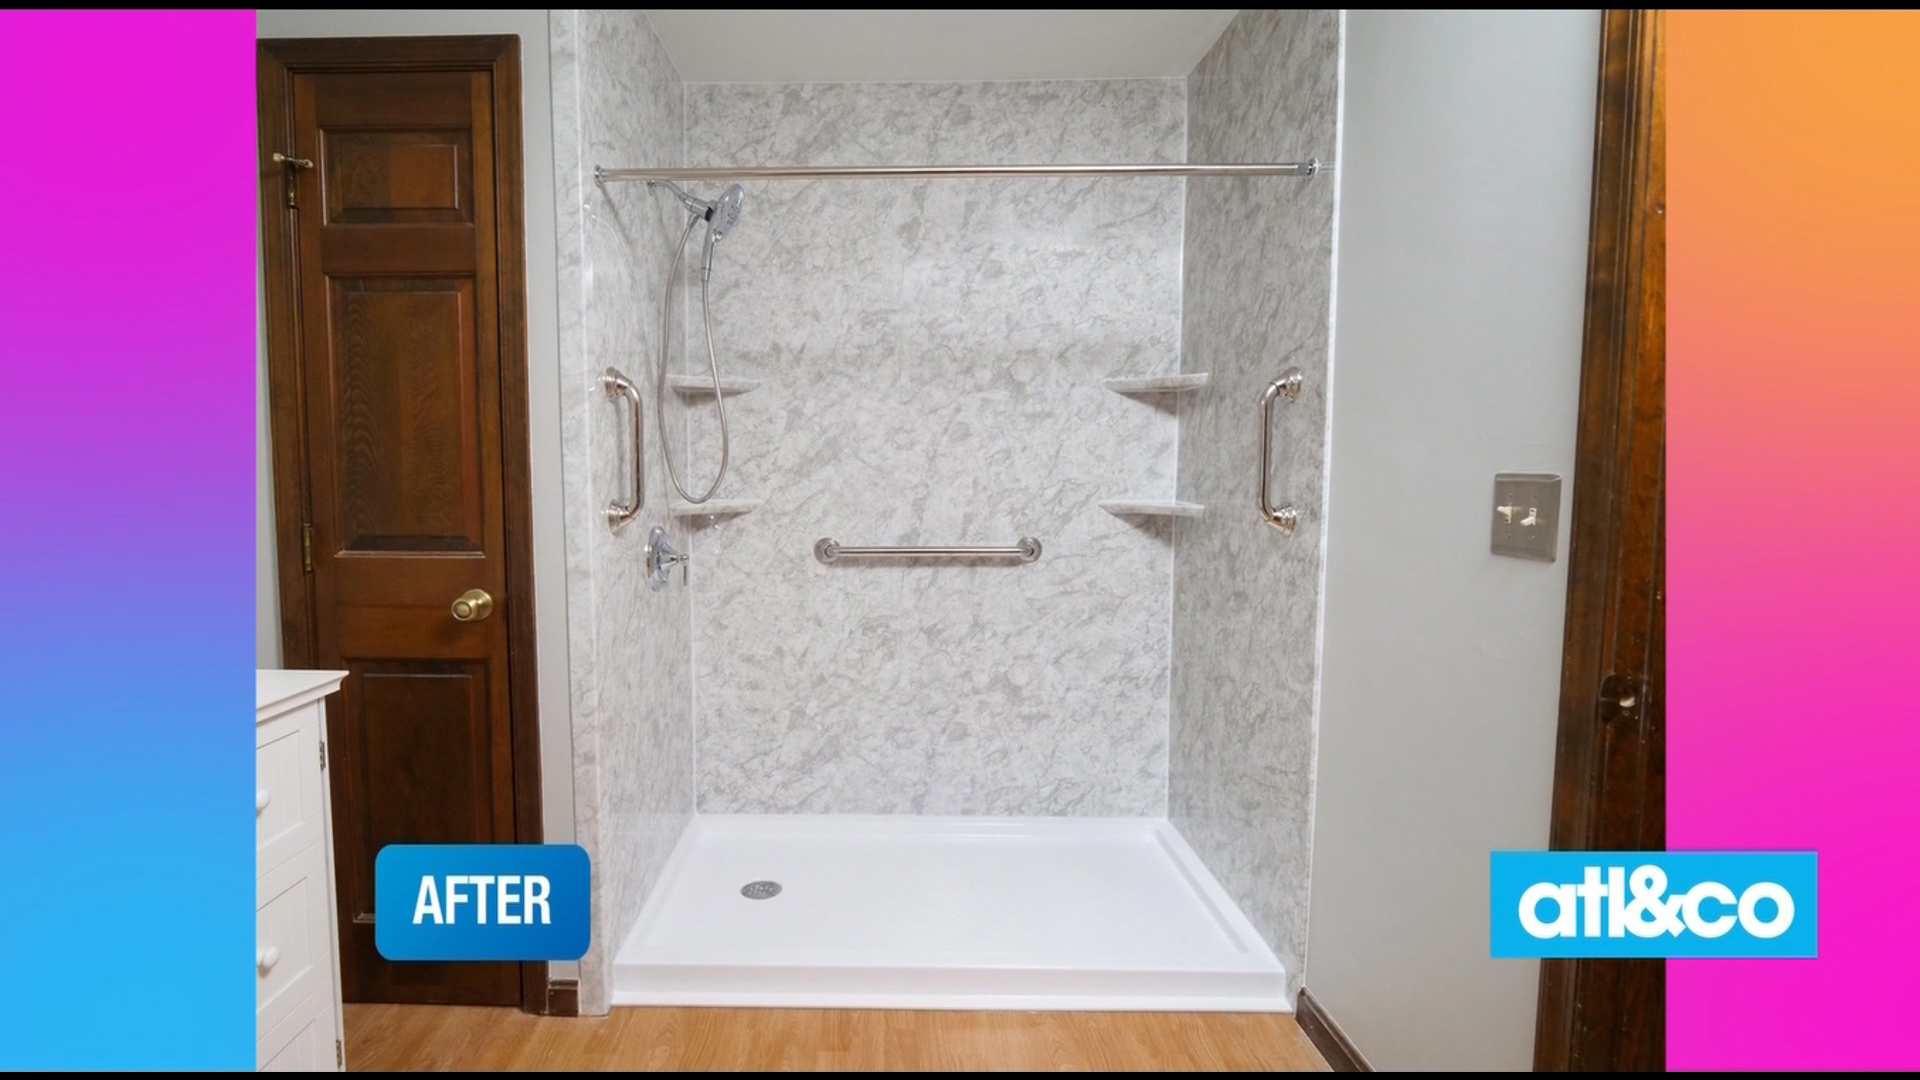 West Shore Home uses ADA compliant shower accessories and a one-day installation process for a beautiful and safe bathroom remodel.